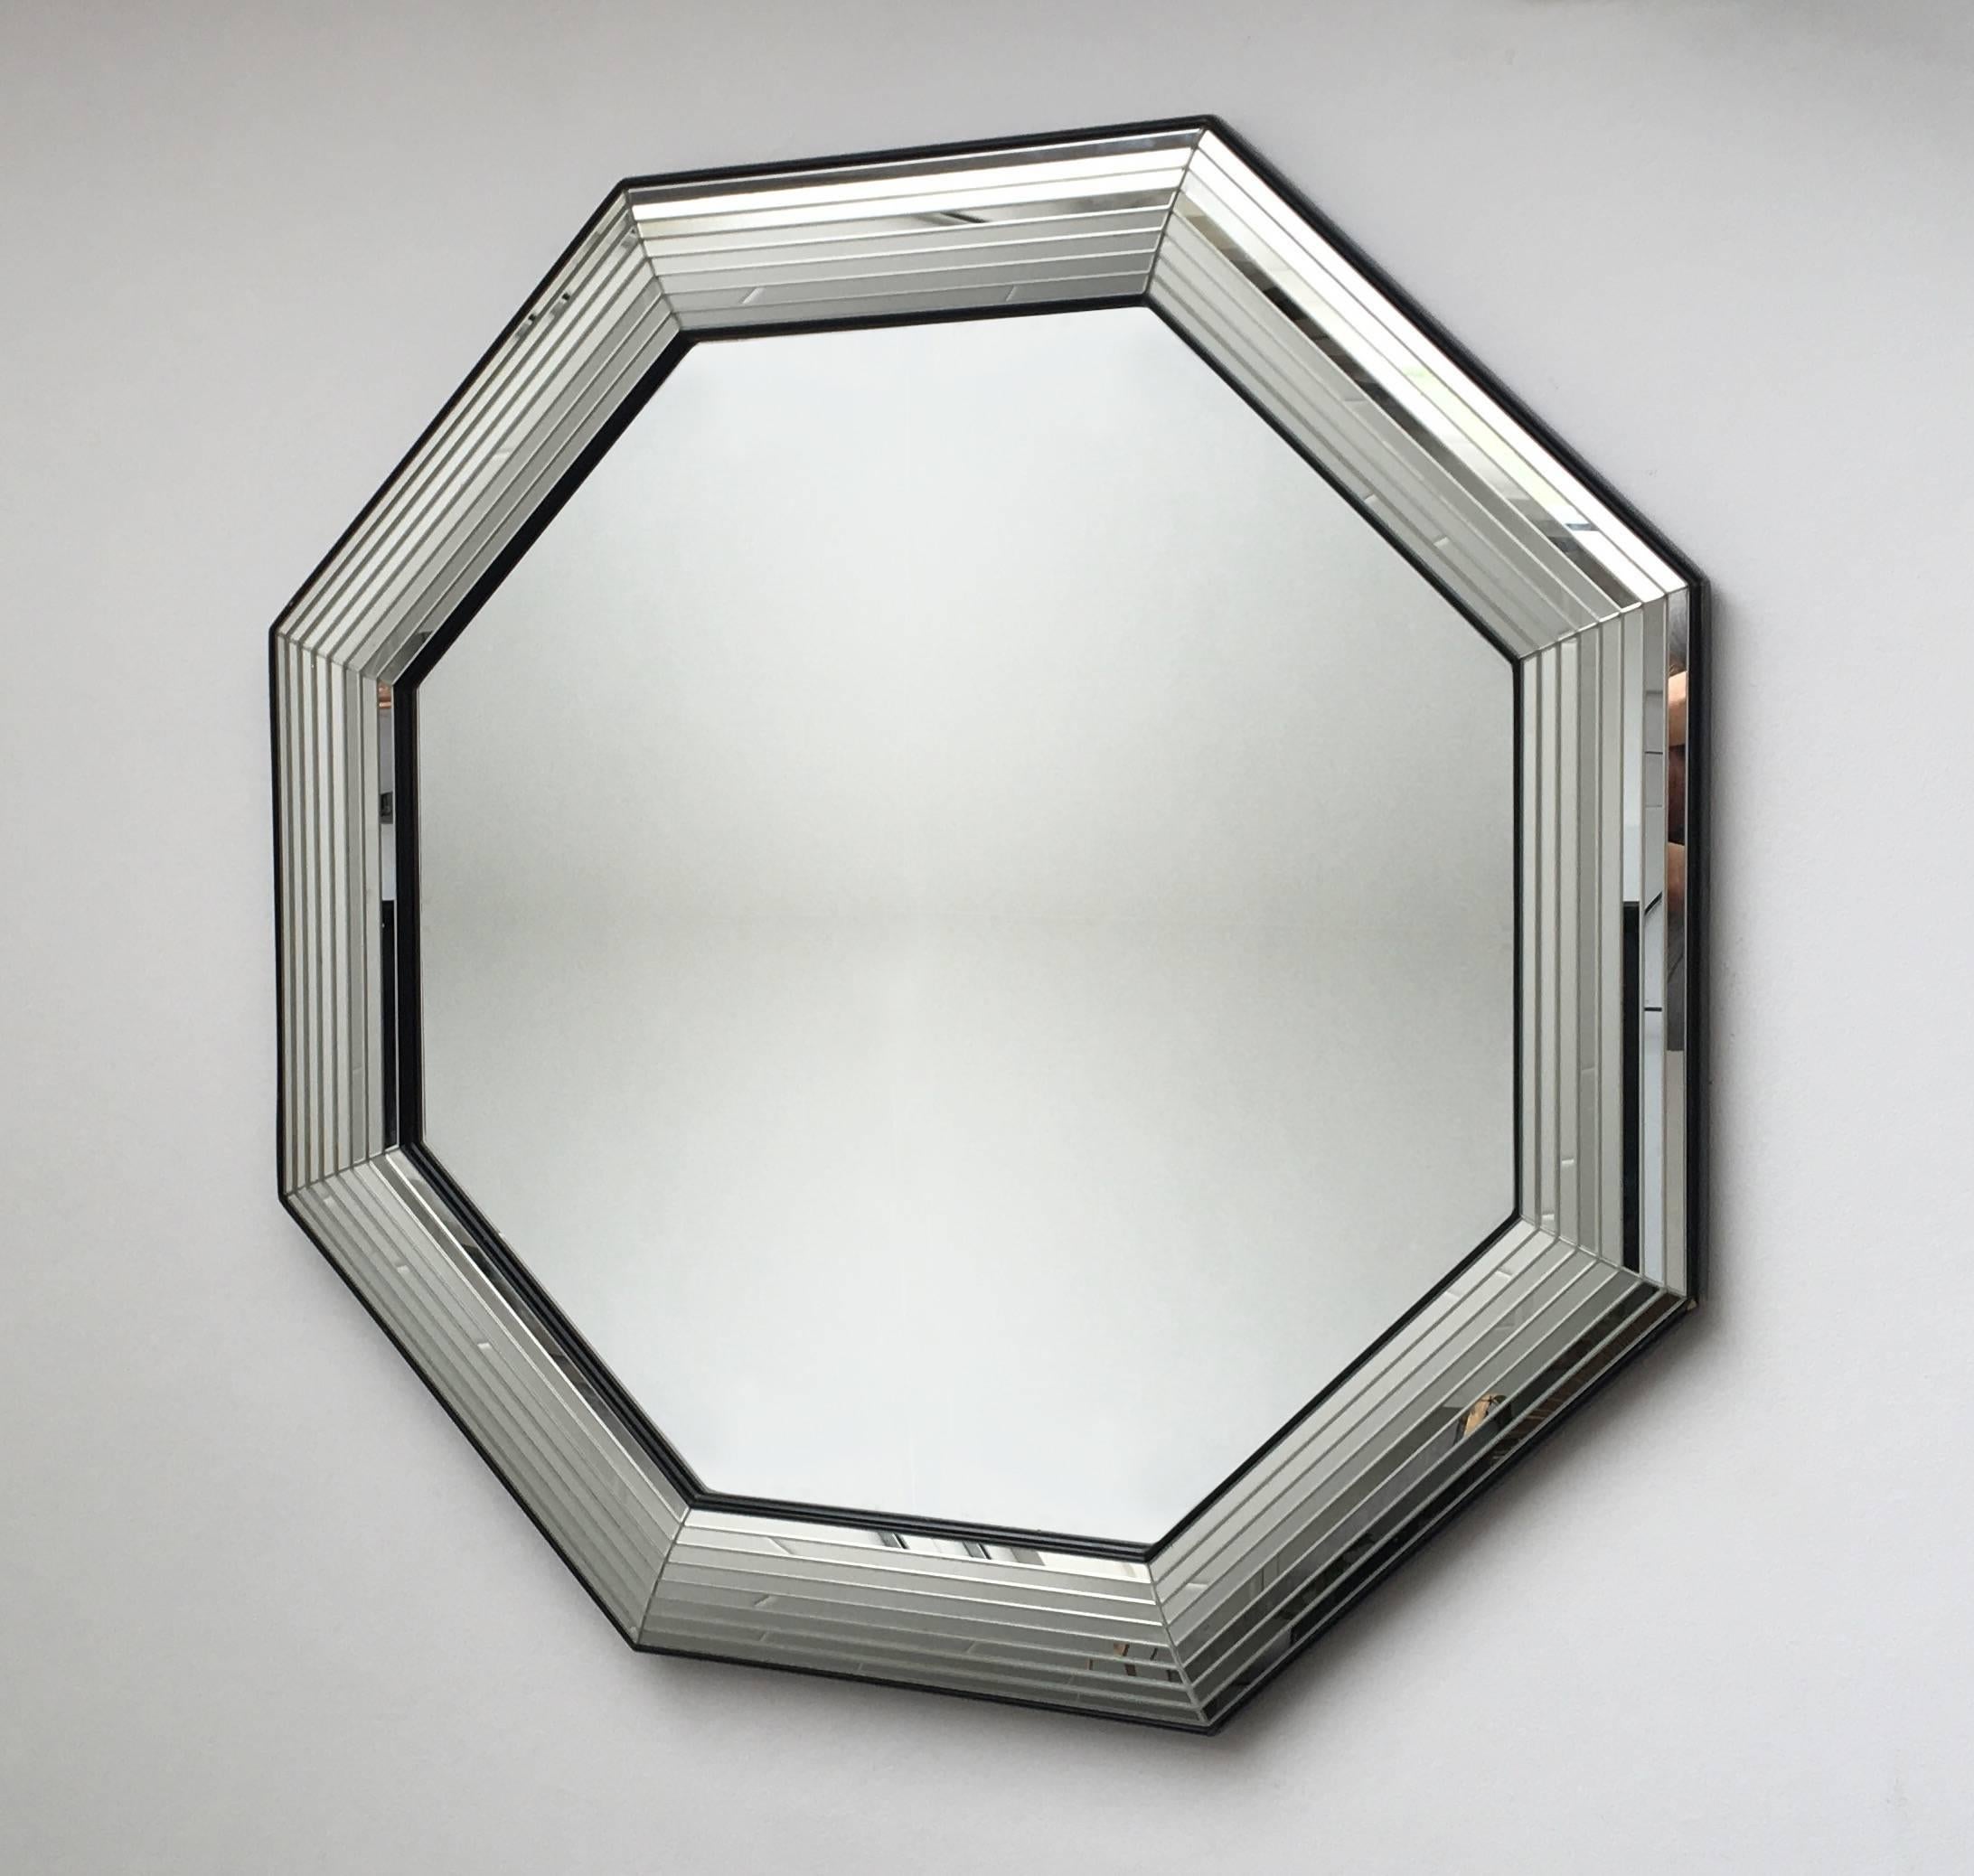 This beautiful designed mirror features a lineal etched mirror border in an octagonal shape. This modern sculptured piece is definitely an eyecatcher which was designed and manufactured in Belgium, circa 1970s. The mirror is very much in style of